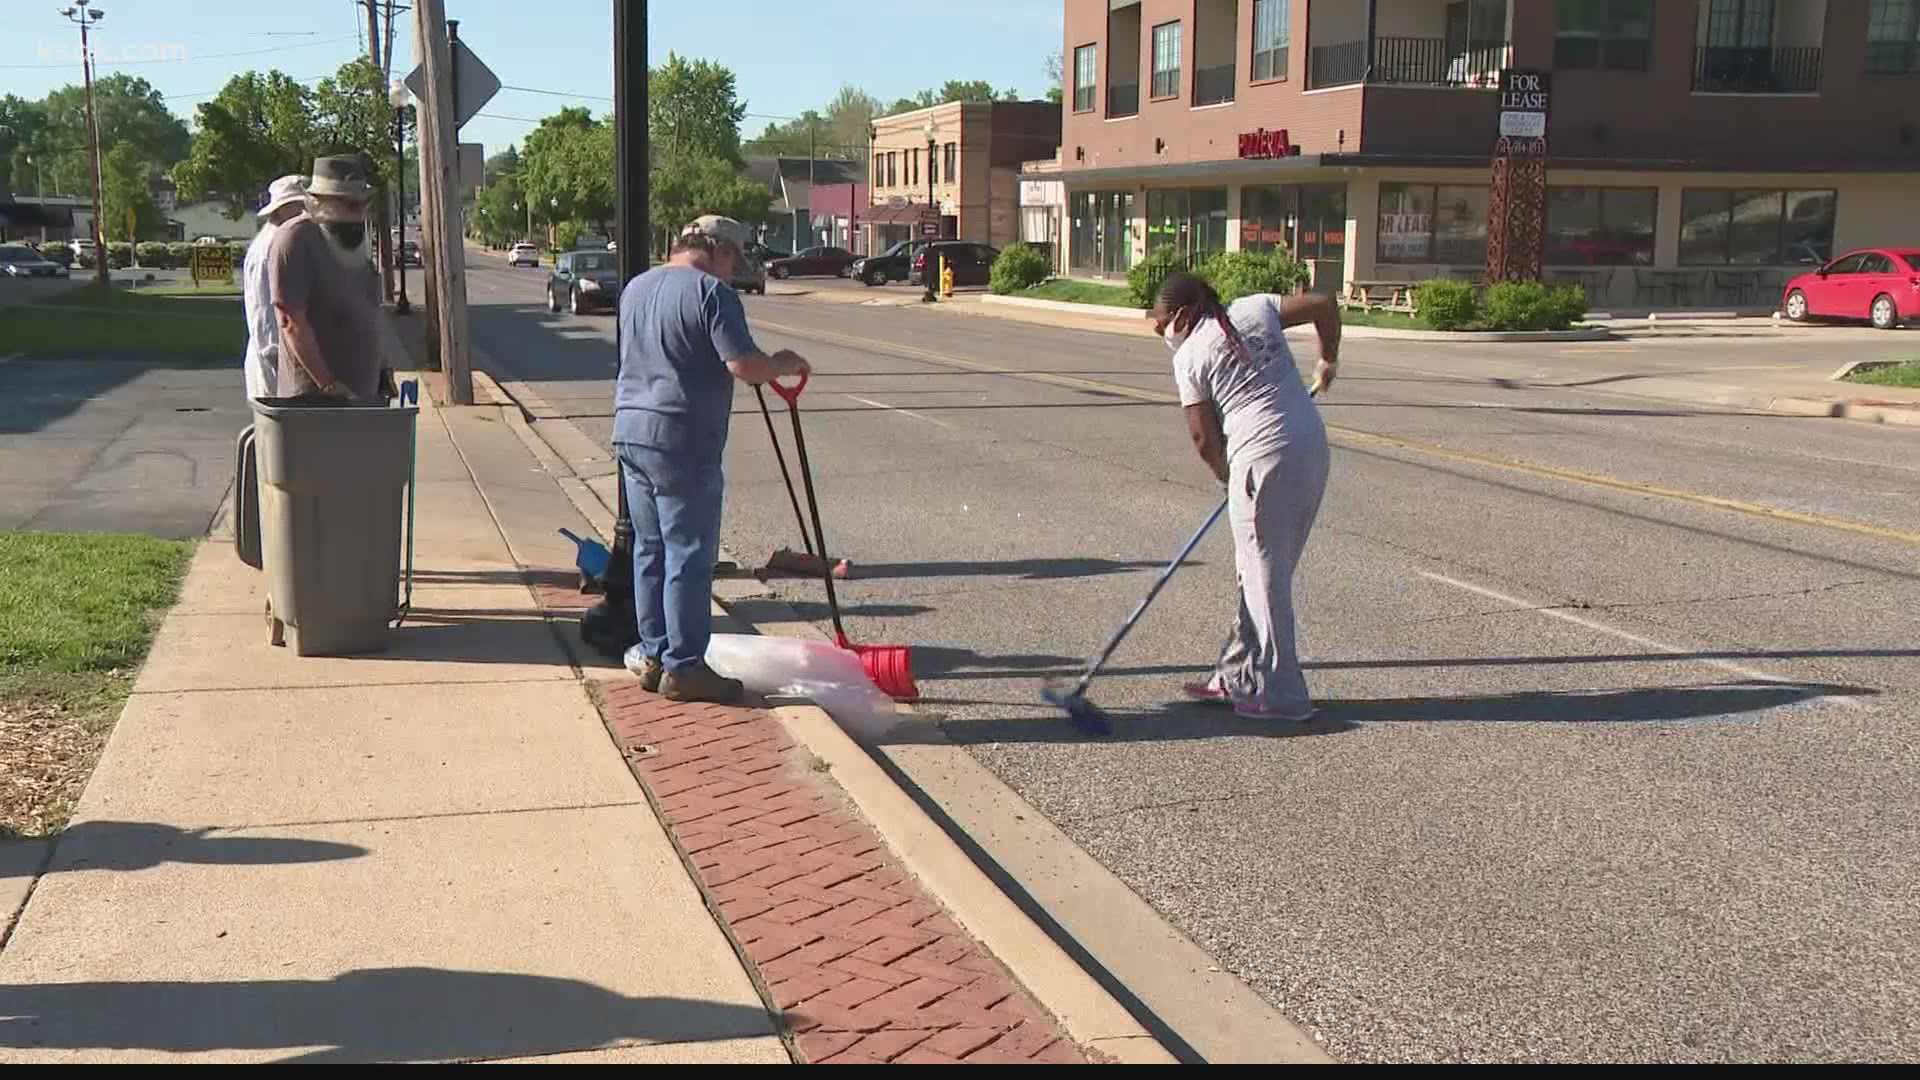 Parts of Ferguson were damaged after peaceful protests turned violent Saturday night. On Sunday, people came out to support the community and assist with the cleanup